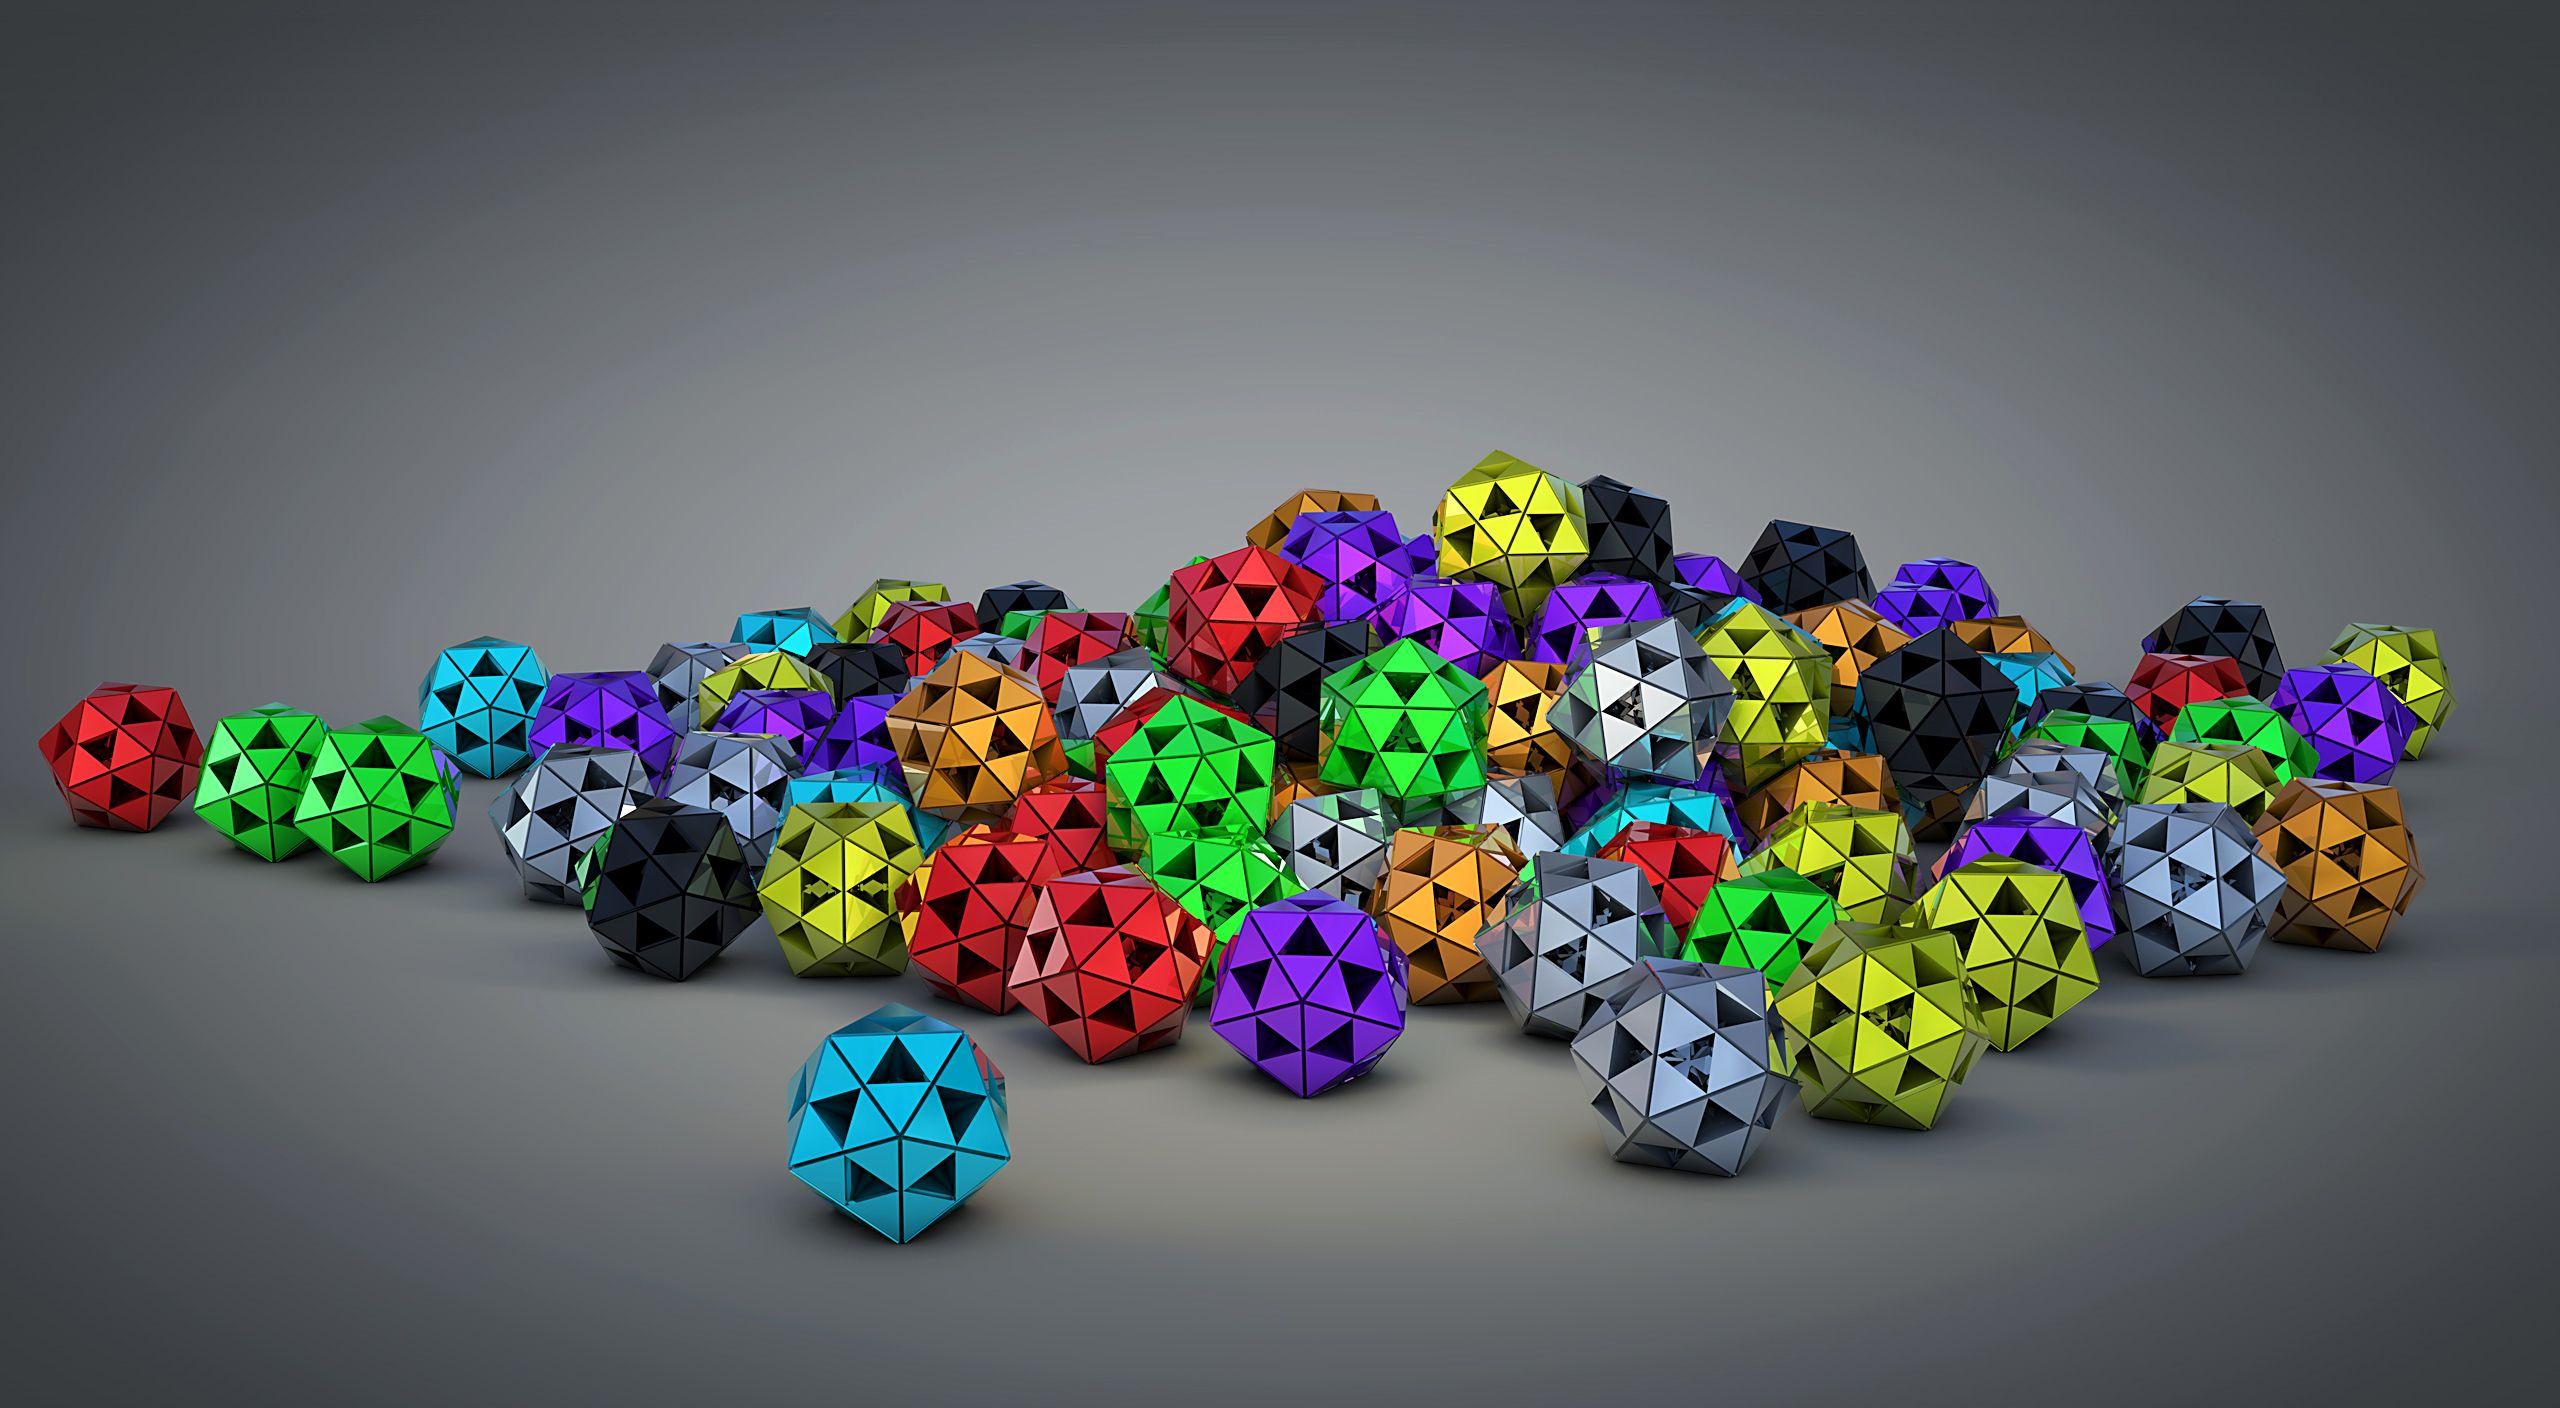 Ball and Blue Triangle Logo - Wallpaper : green, yellow, blue, triangle, ball, ART, color, flower